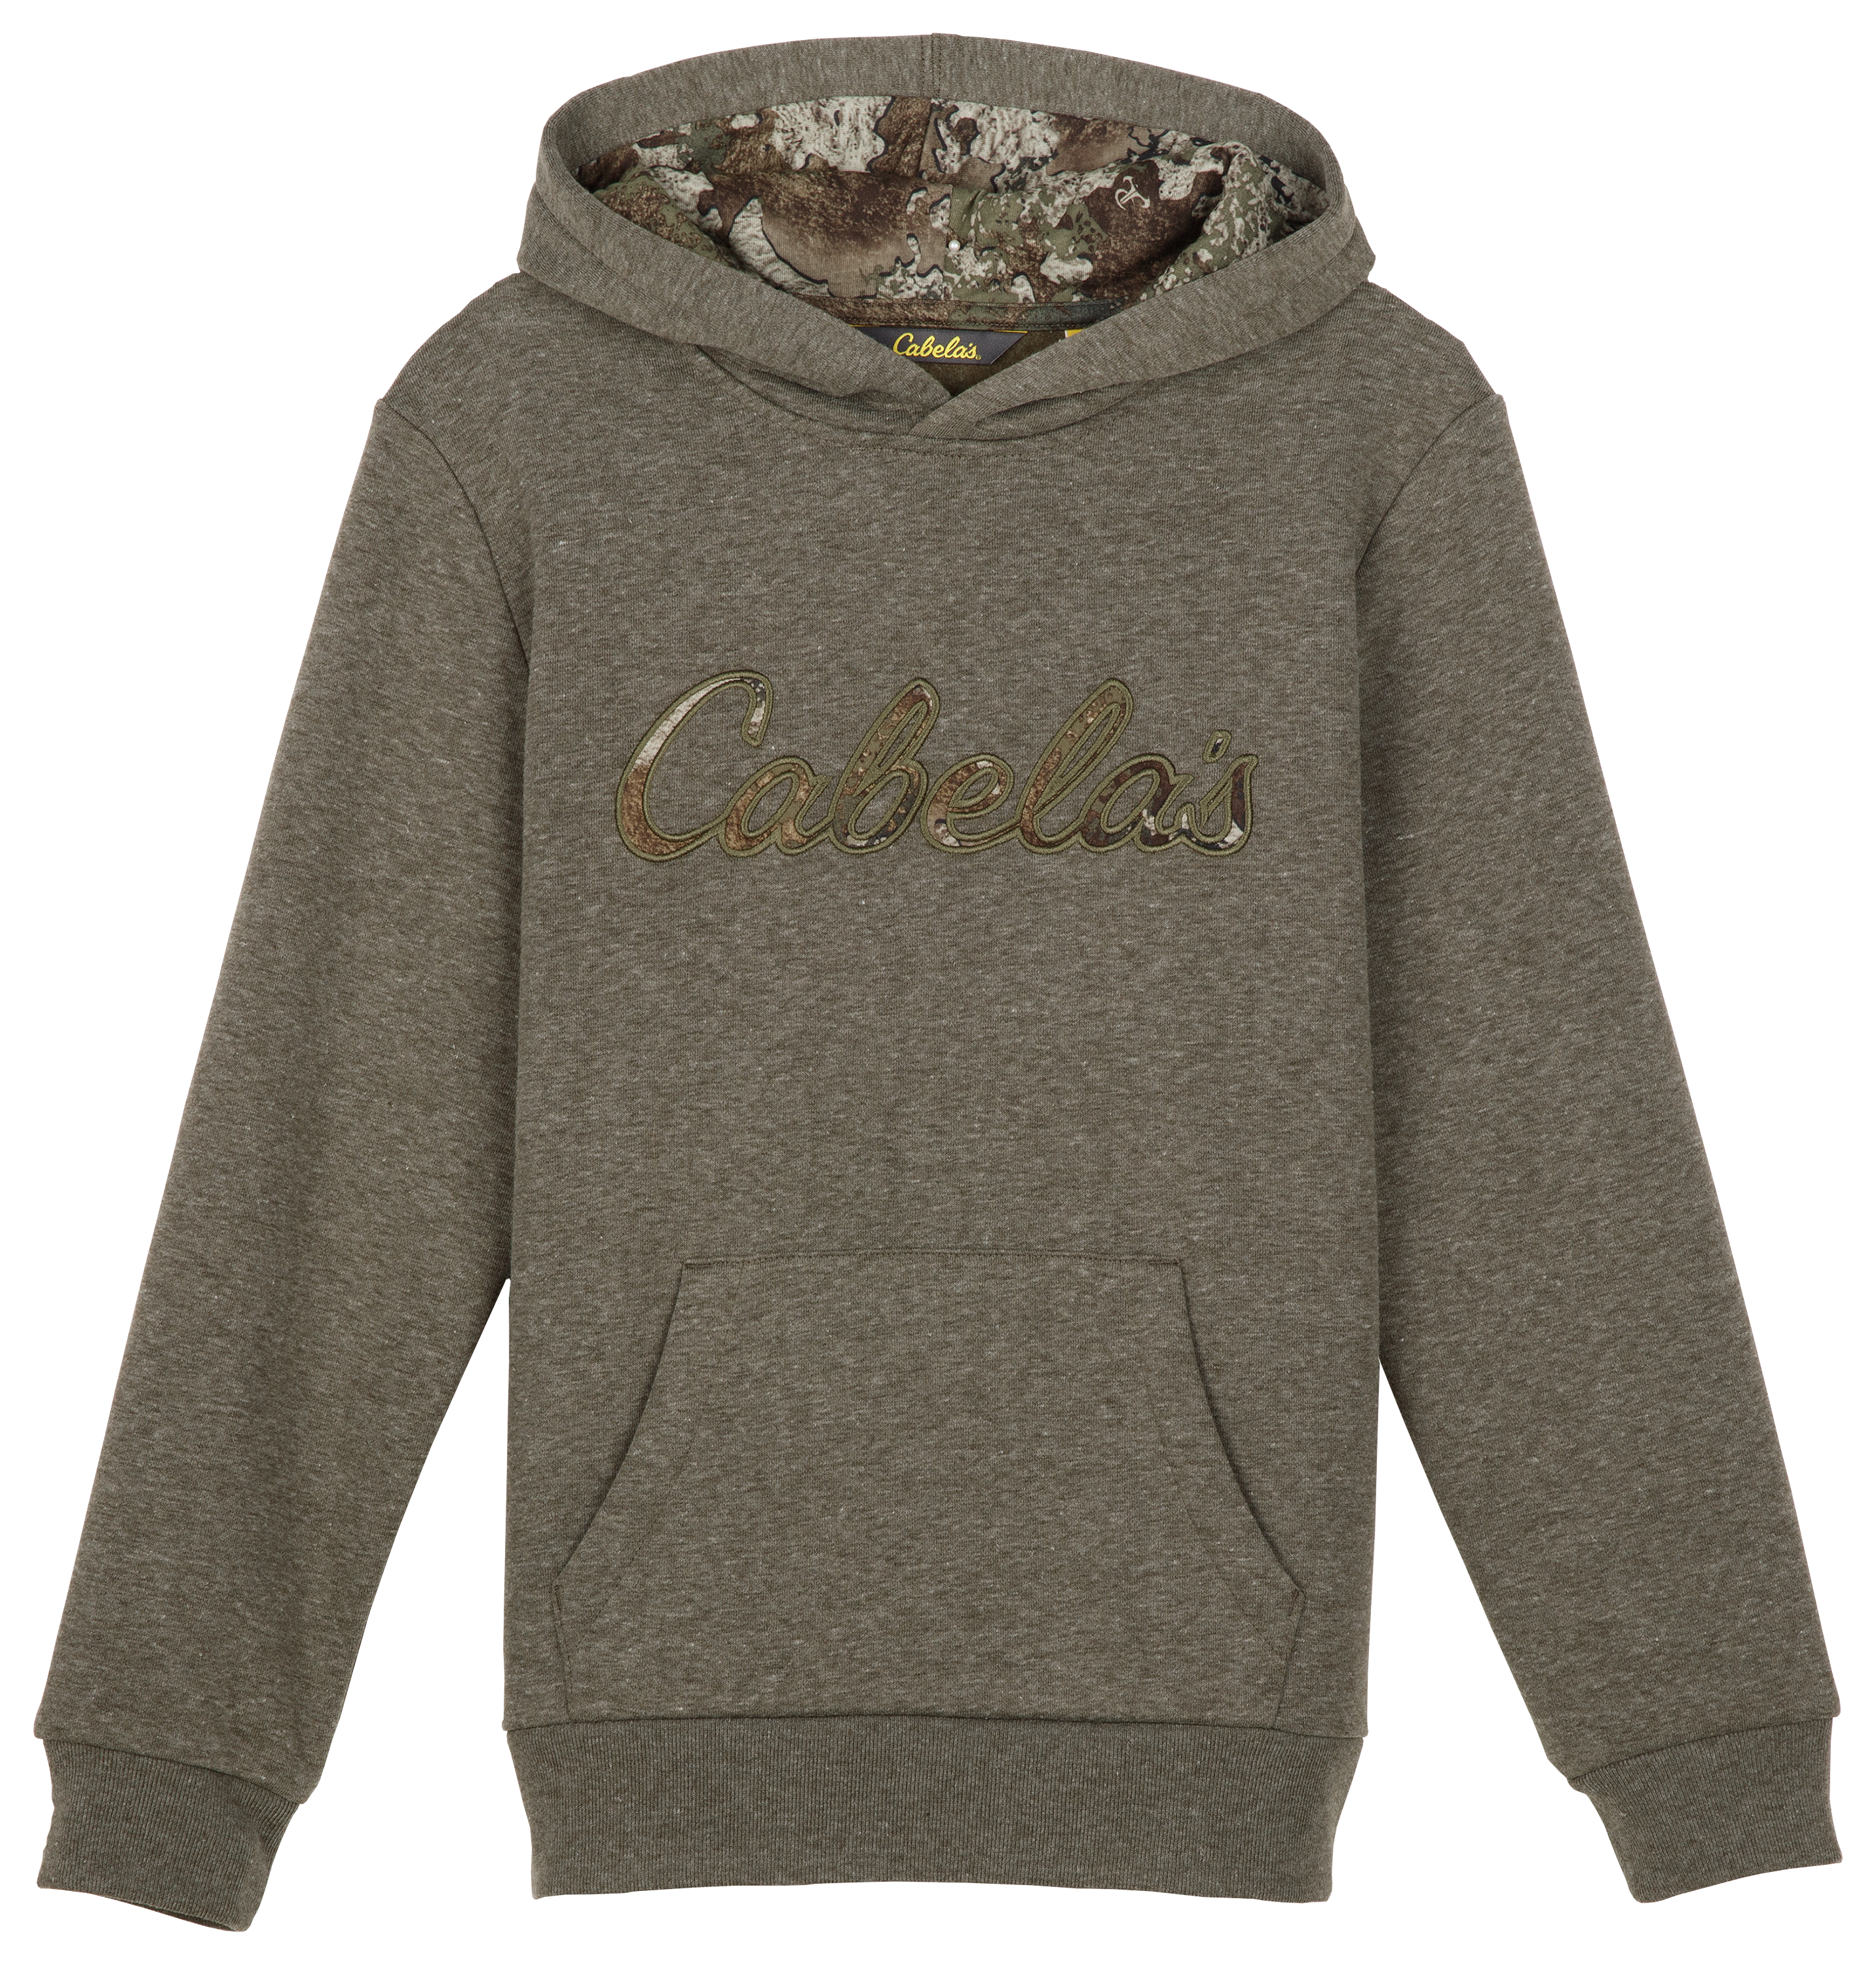 Cabela's Game Day Long-Sleeve Hoodie for Men